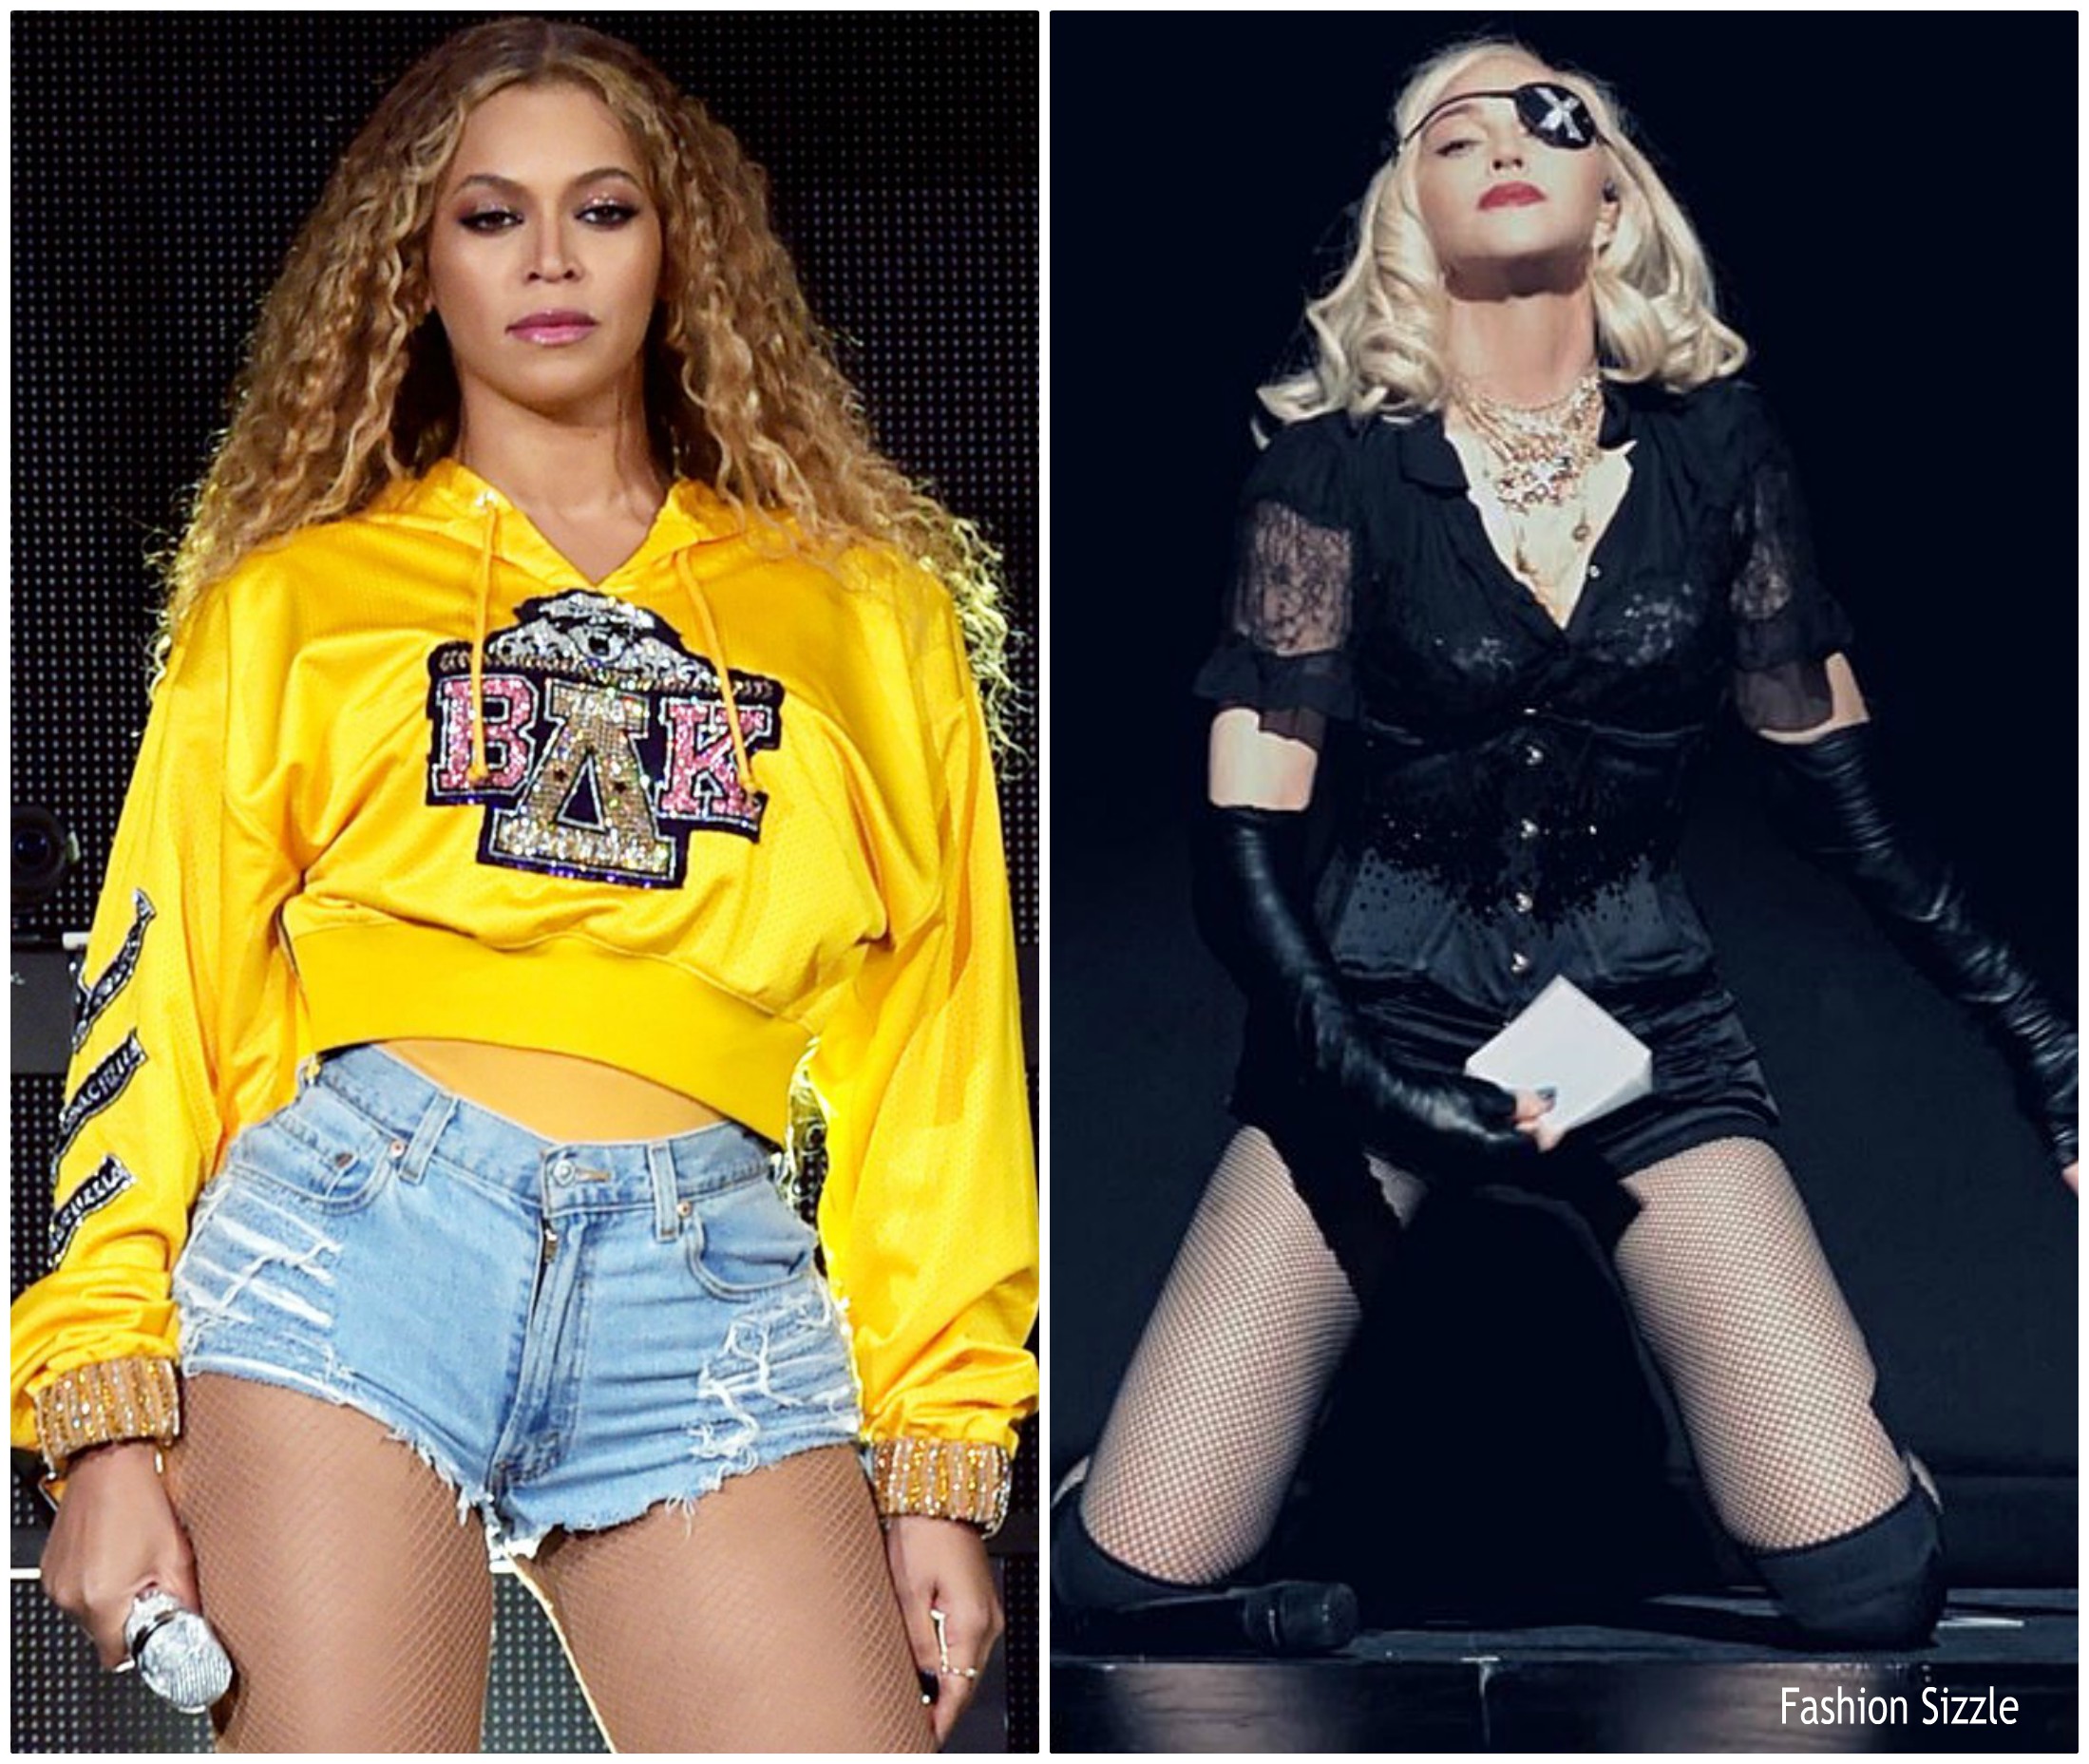 Beyoncé Ties  Madonna With More Consecutive Years Charting A Song On  Billboard Hot 100 (23 years)